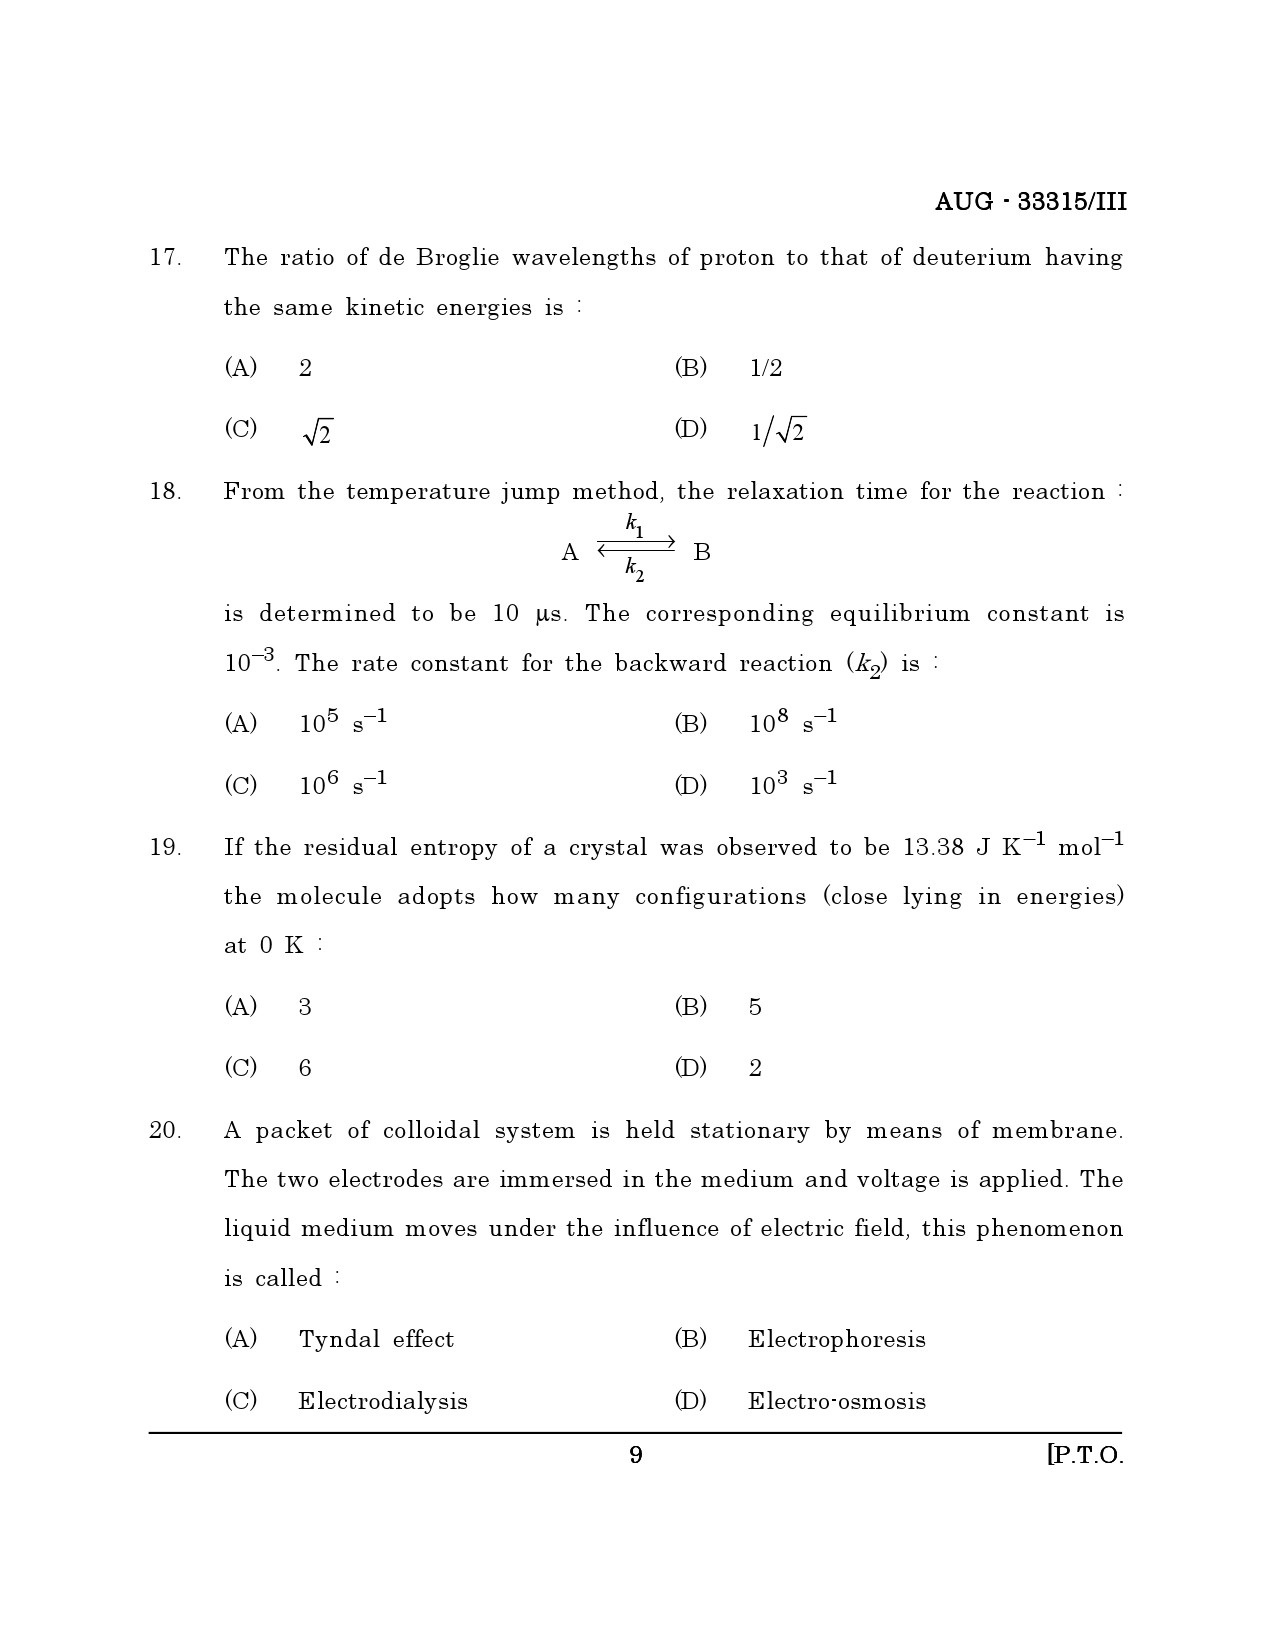 Maharashtra SET Chemical Sciences Question Paper III August 2015 8